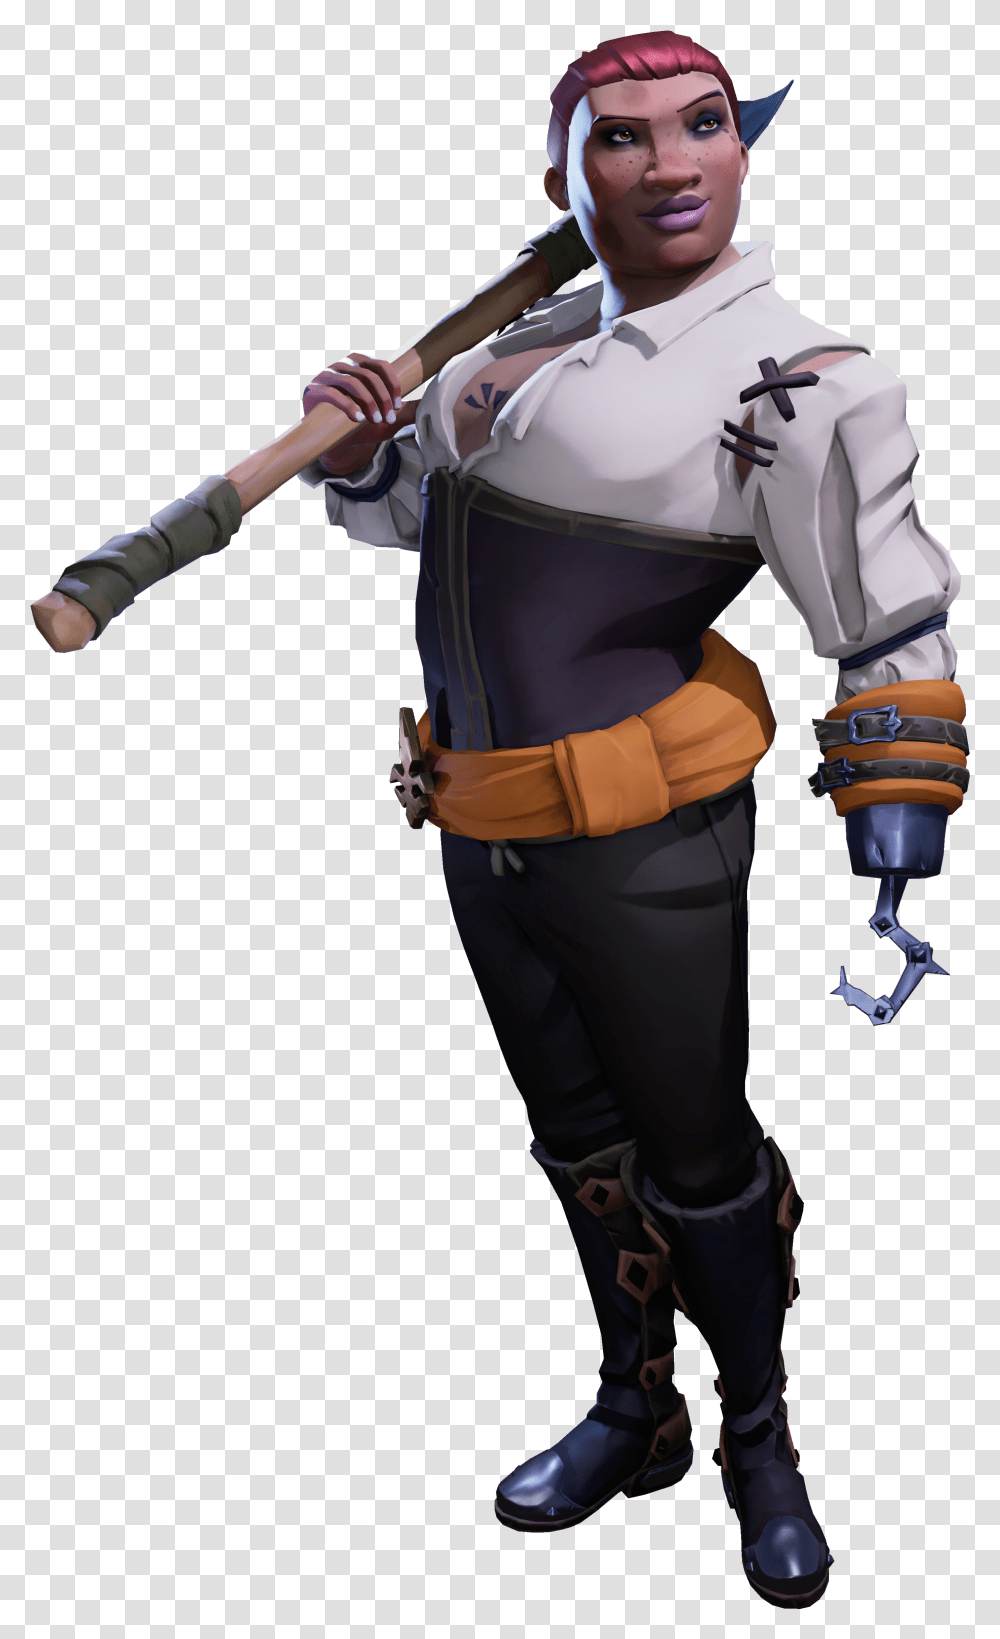 Sea Of Thieves Conquistador Pirate Sea Of Thieves Chars Transparent Png